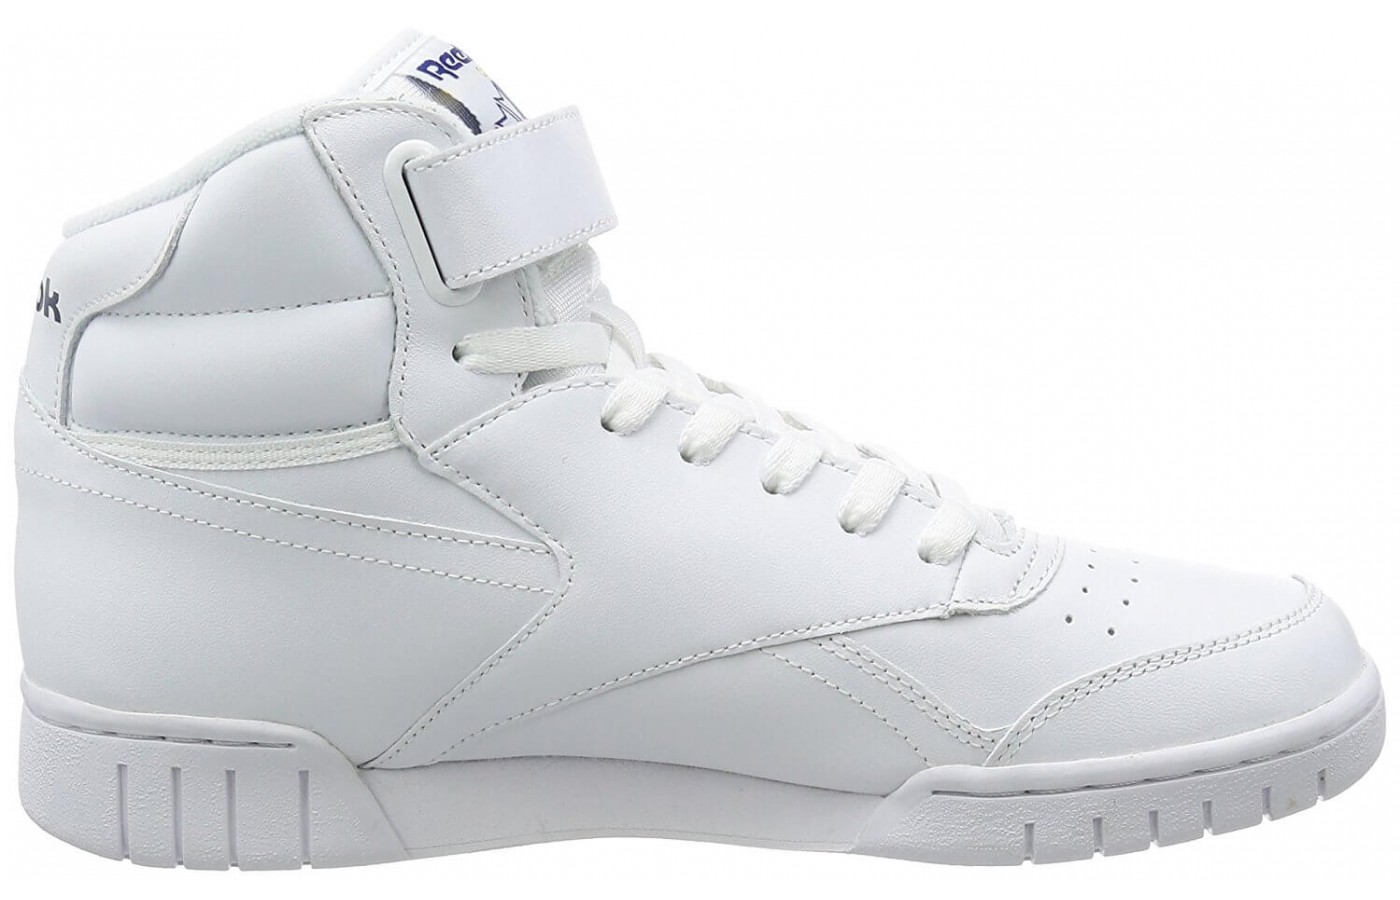 The Reebok Ex-O-Fit Hi features a leather upper